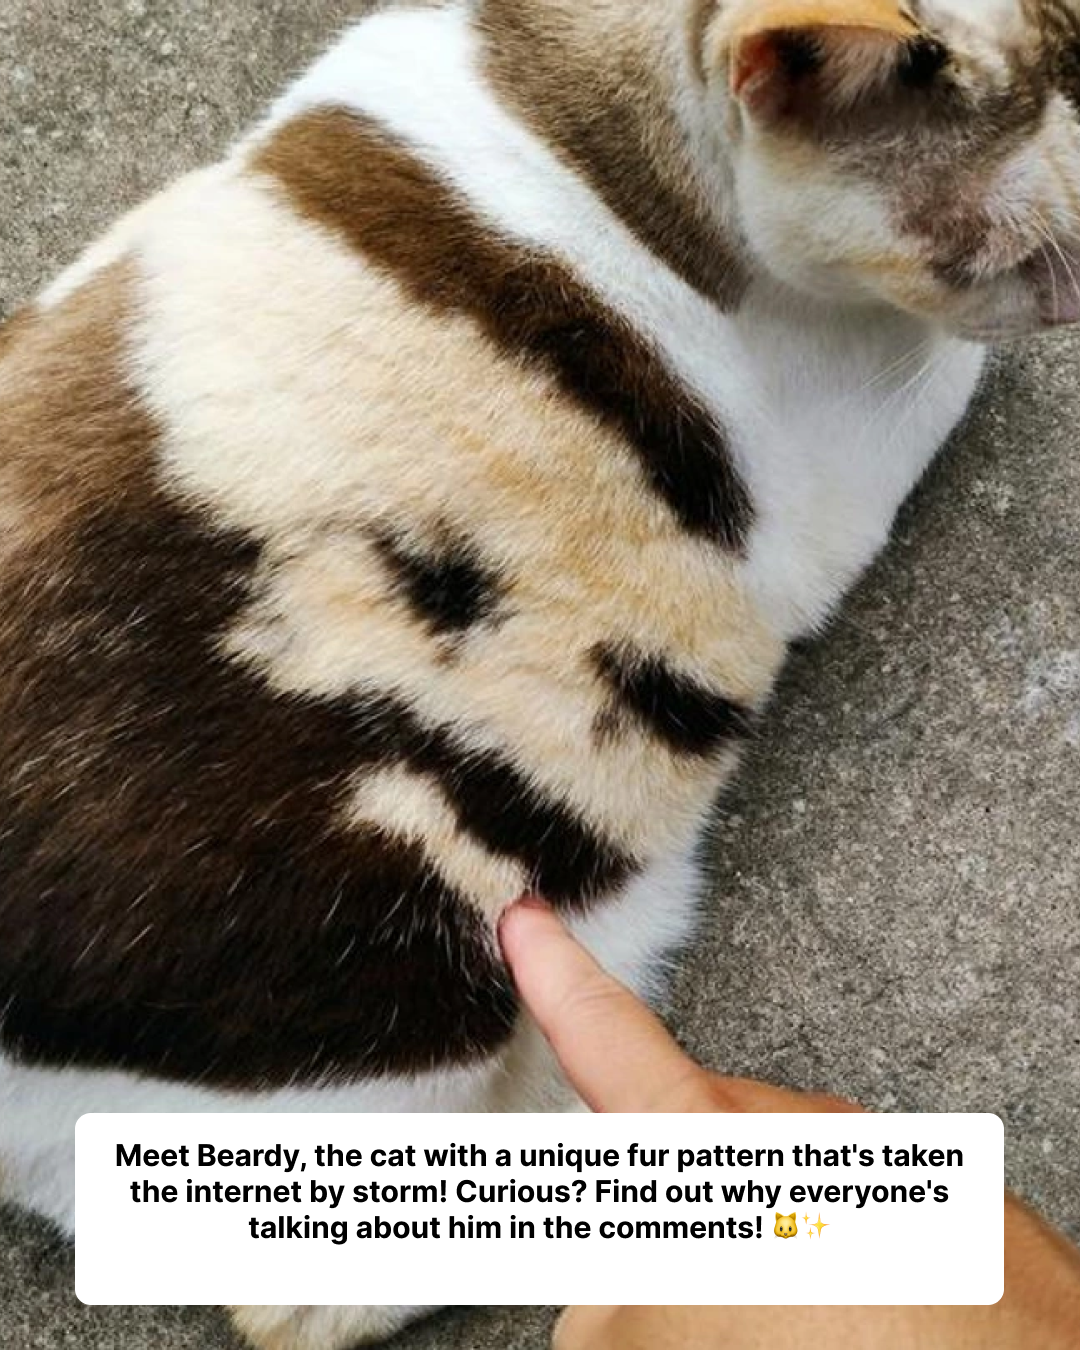 The Feline with a Human Touch: Meet the Cat with a “Man with a Beard” Pattern on its Fur